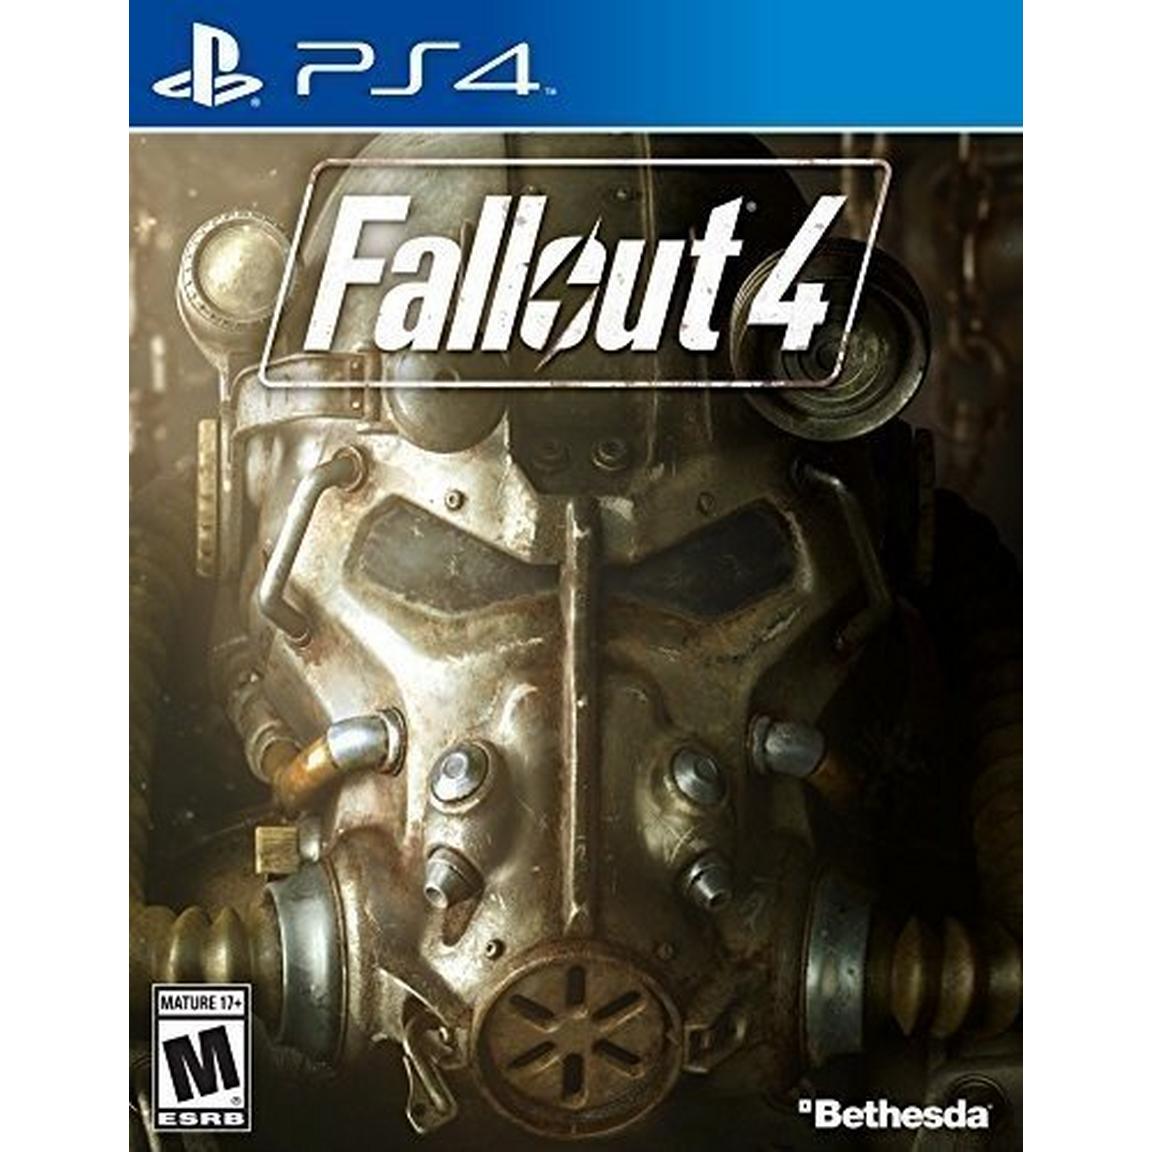 Fallout 4 Game of the Year Steelbook Edition Gamestop Exclusive - PlayStation 4 -  Bethesda Softworks, FA4GGMP4PENA